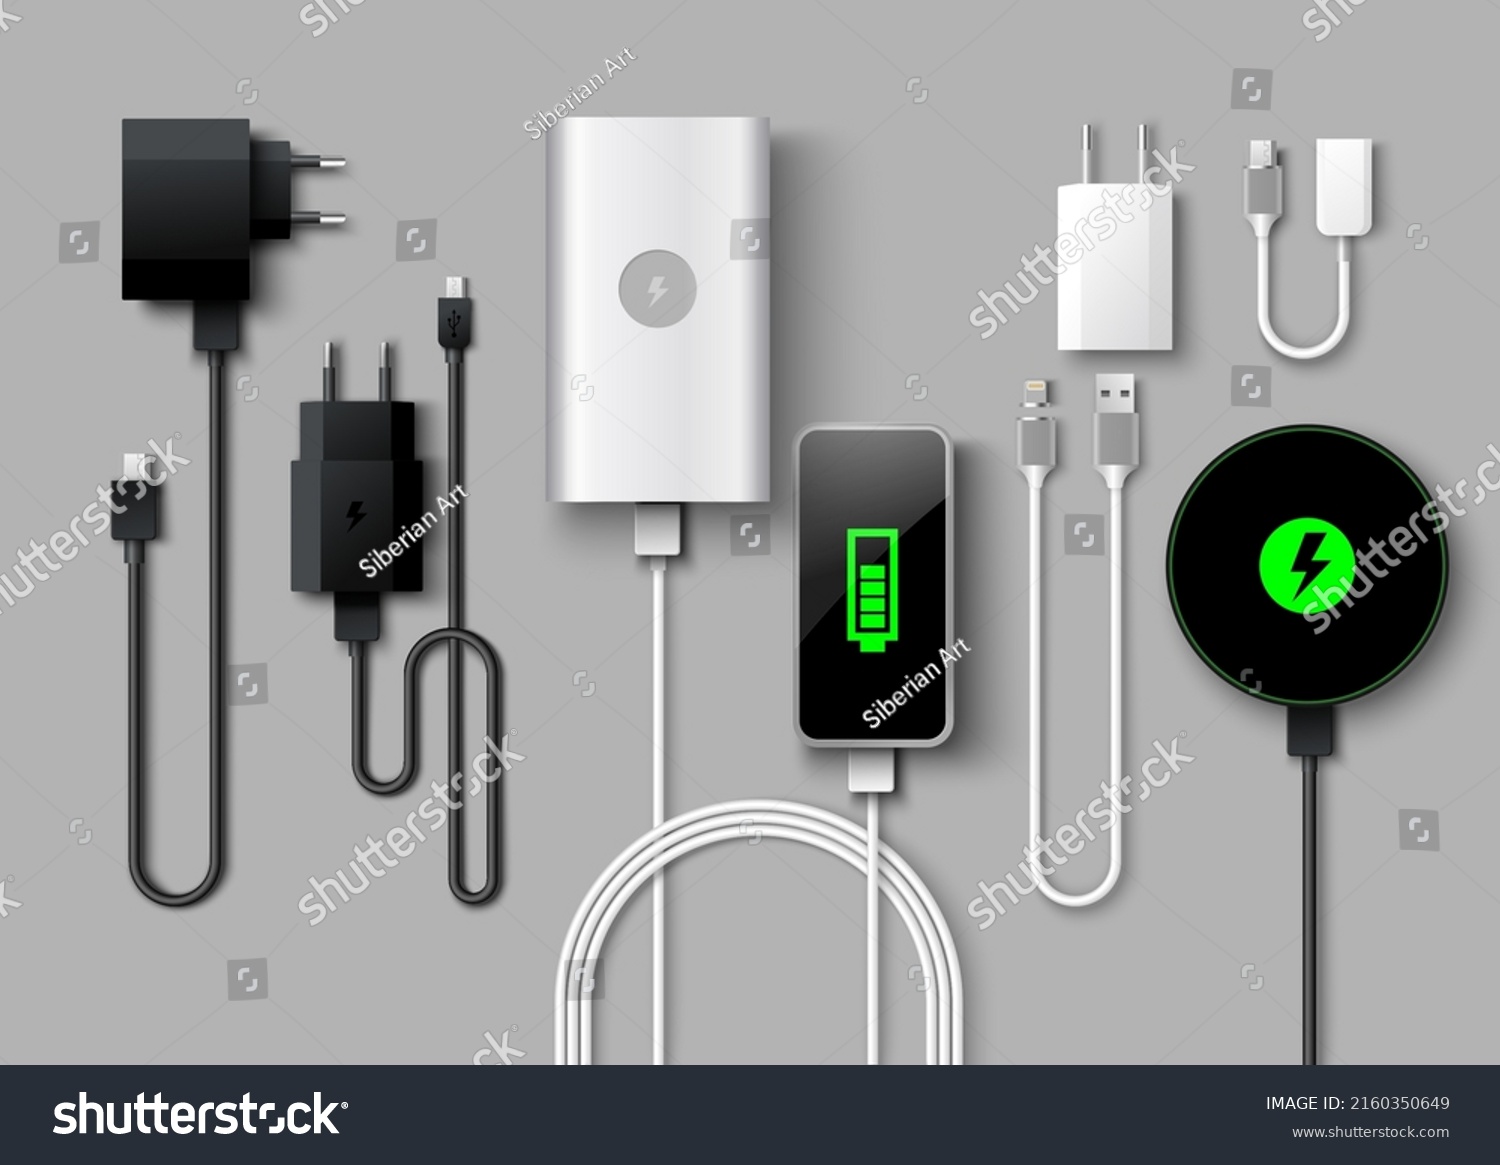 SVG of Mobile phone charger vector set. Realistic smartphone power supply. 3D USB cables, cords and electric plugs. Auto adaptors for charging digital devices. Equipment for accumulator refuel svg